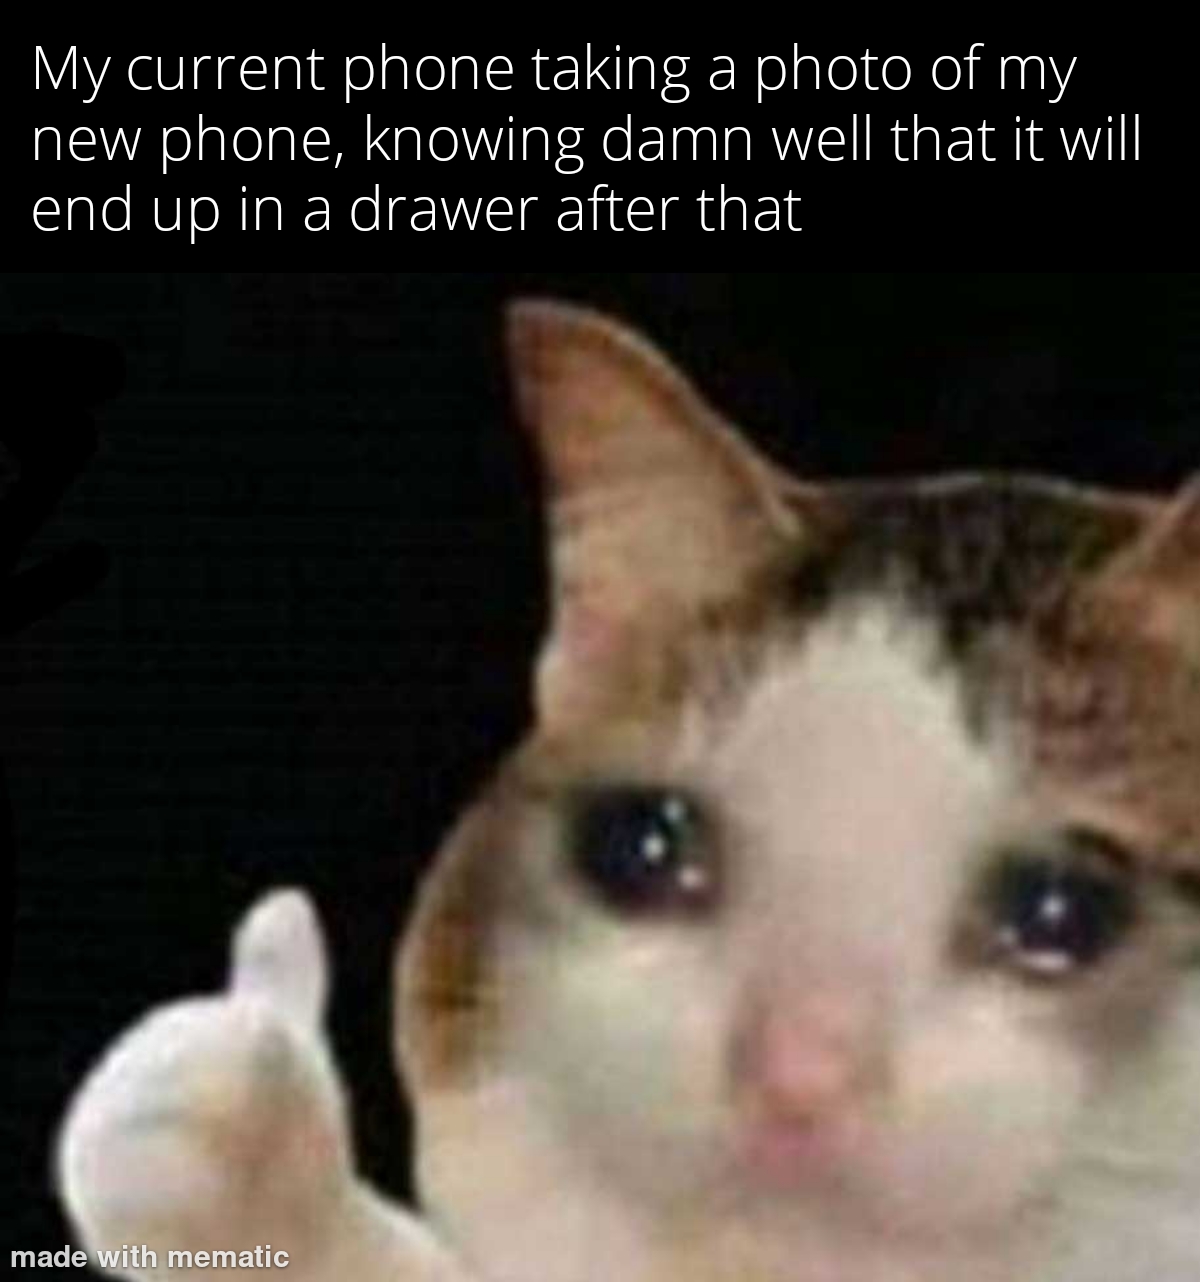 dank memes -  among us sad cat meme - My current phone taking a photo of my new phone, knowing damn well that it will end up in a drawer after that made with mematic